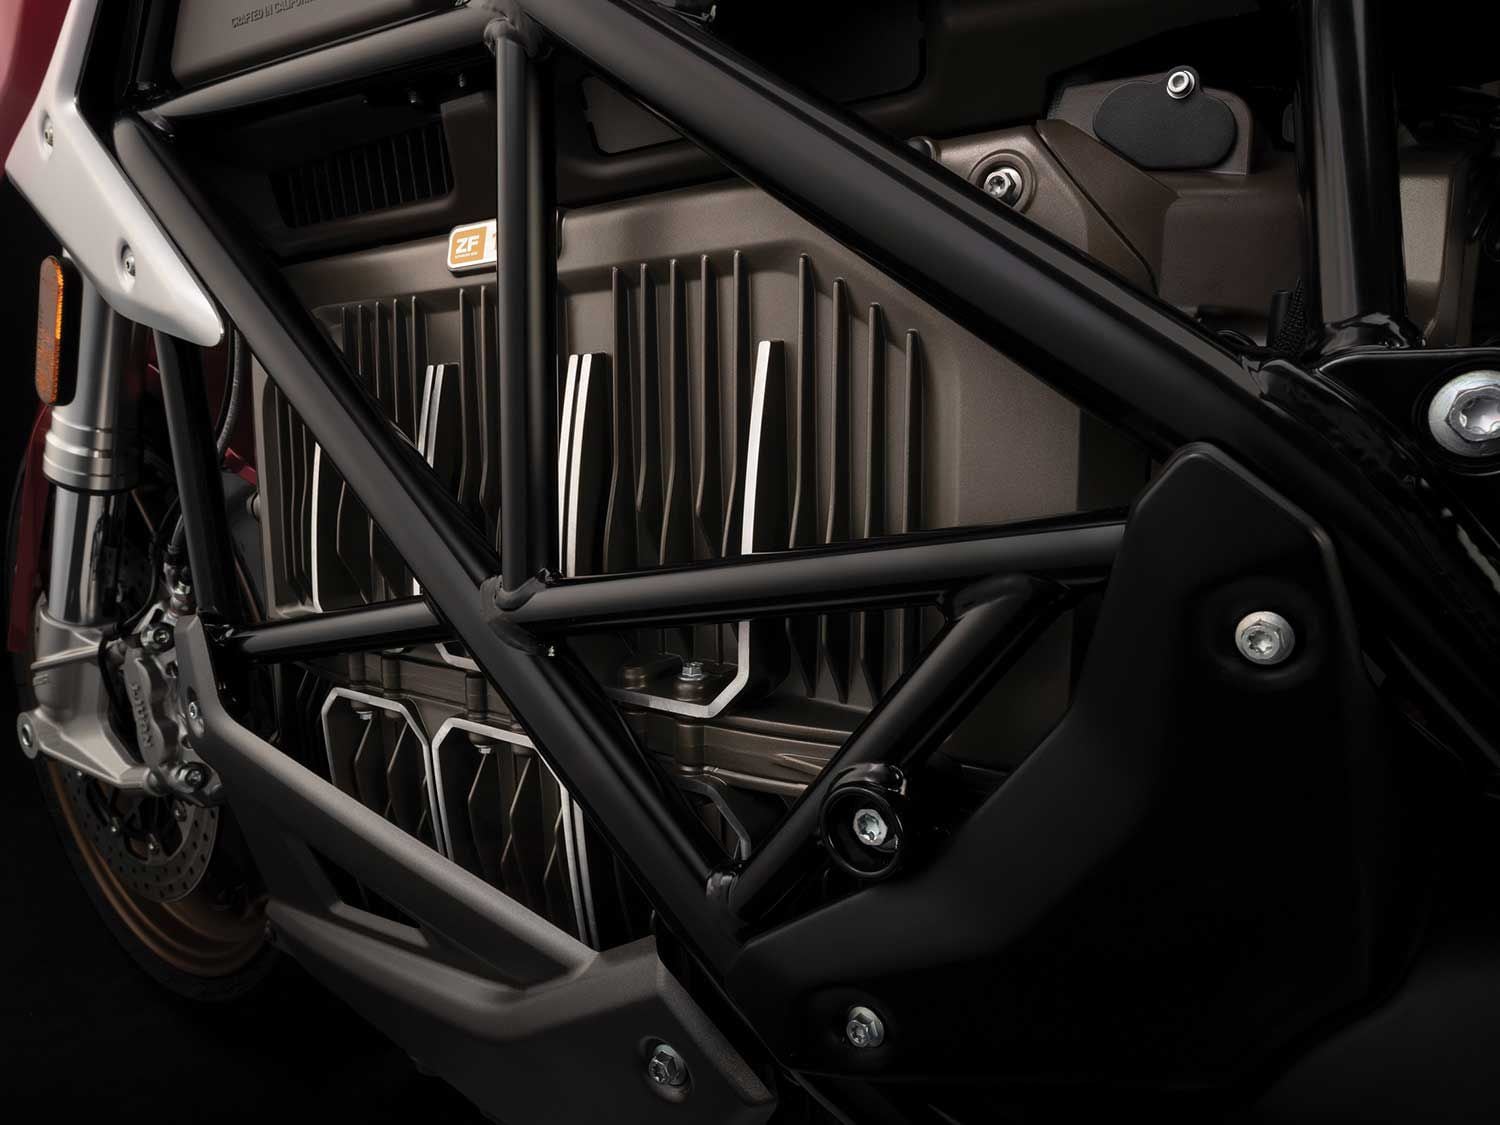 The steel-trellis frame is a huge step forward in the aesthetics department for Zero.